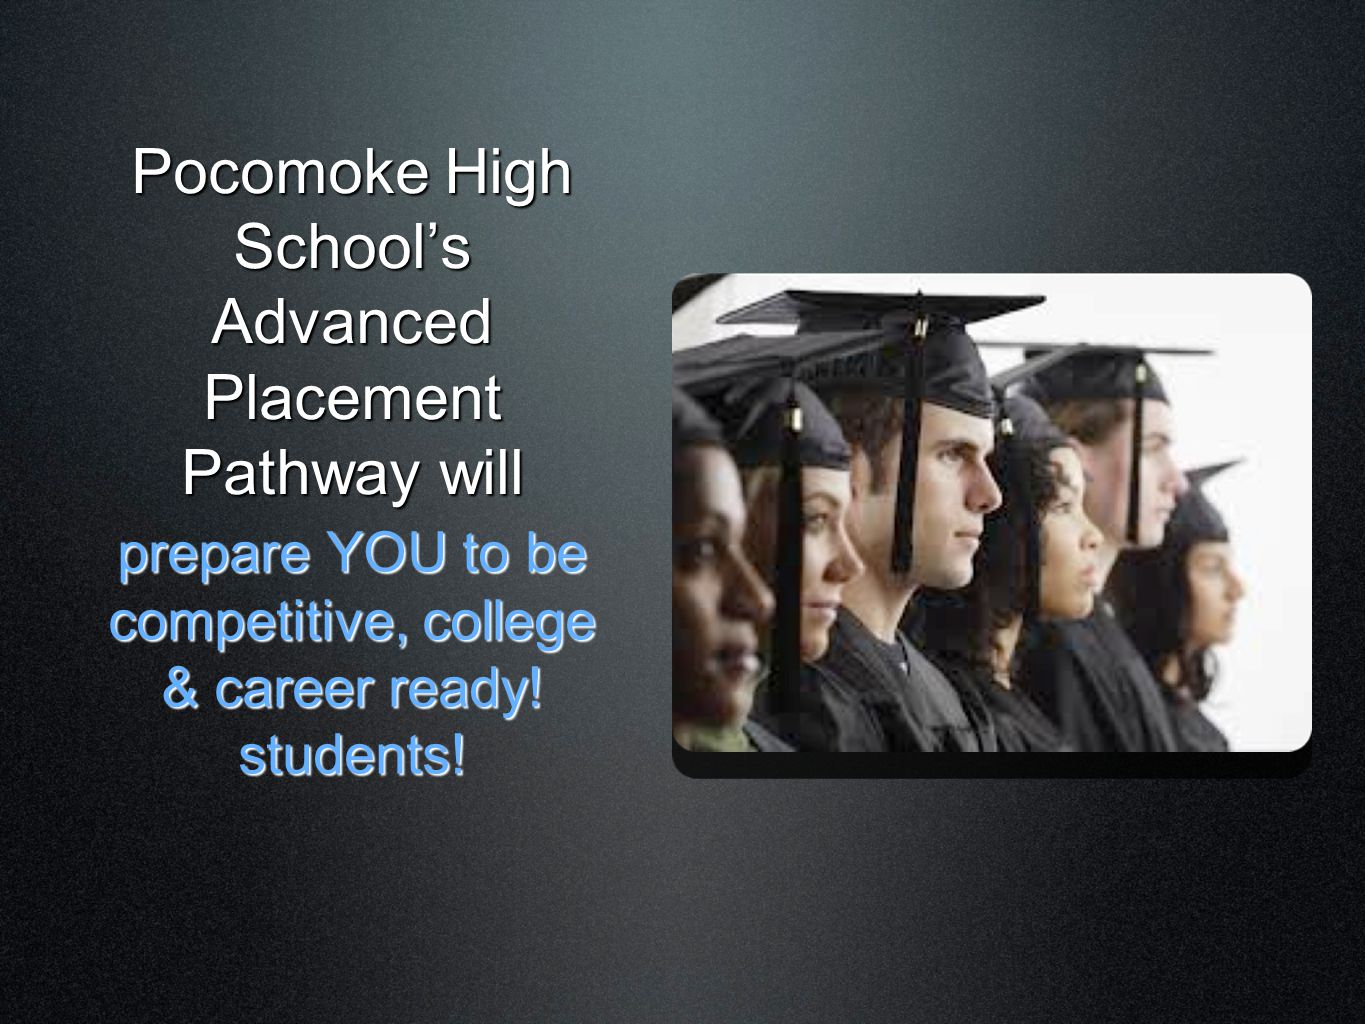 Pocomoke High School’s Advanced Placement Pathway will prepare YOU to be competitive, college & career ready.